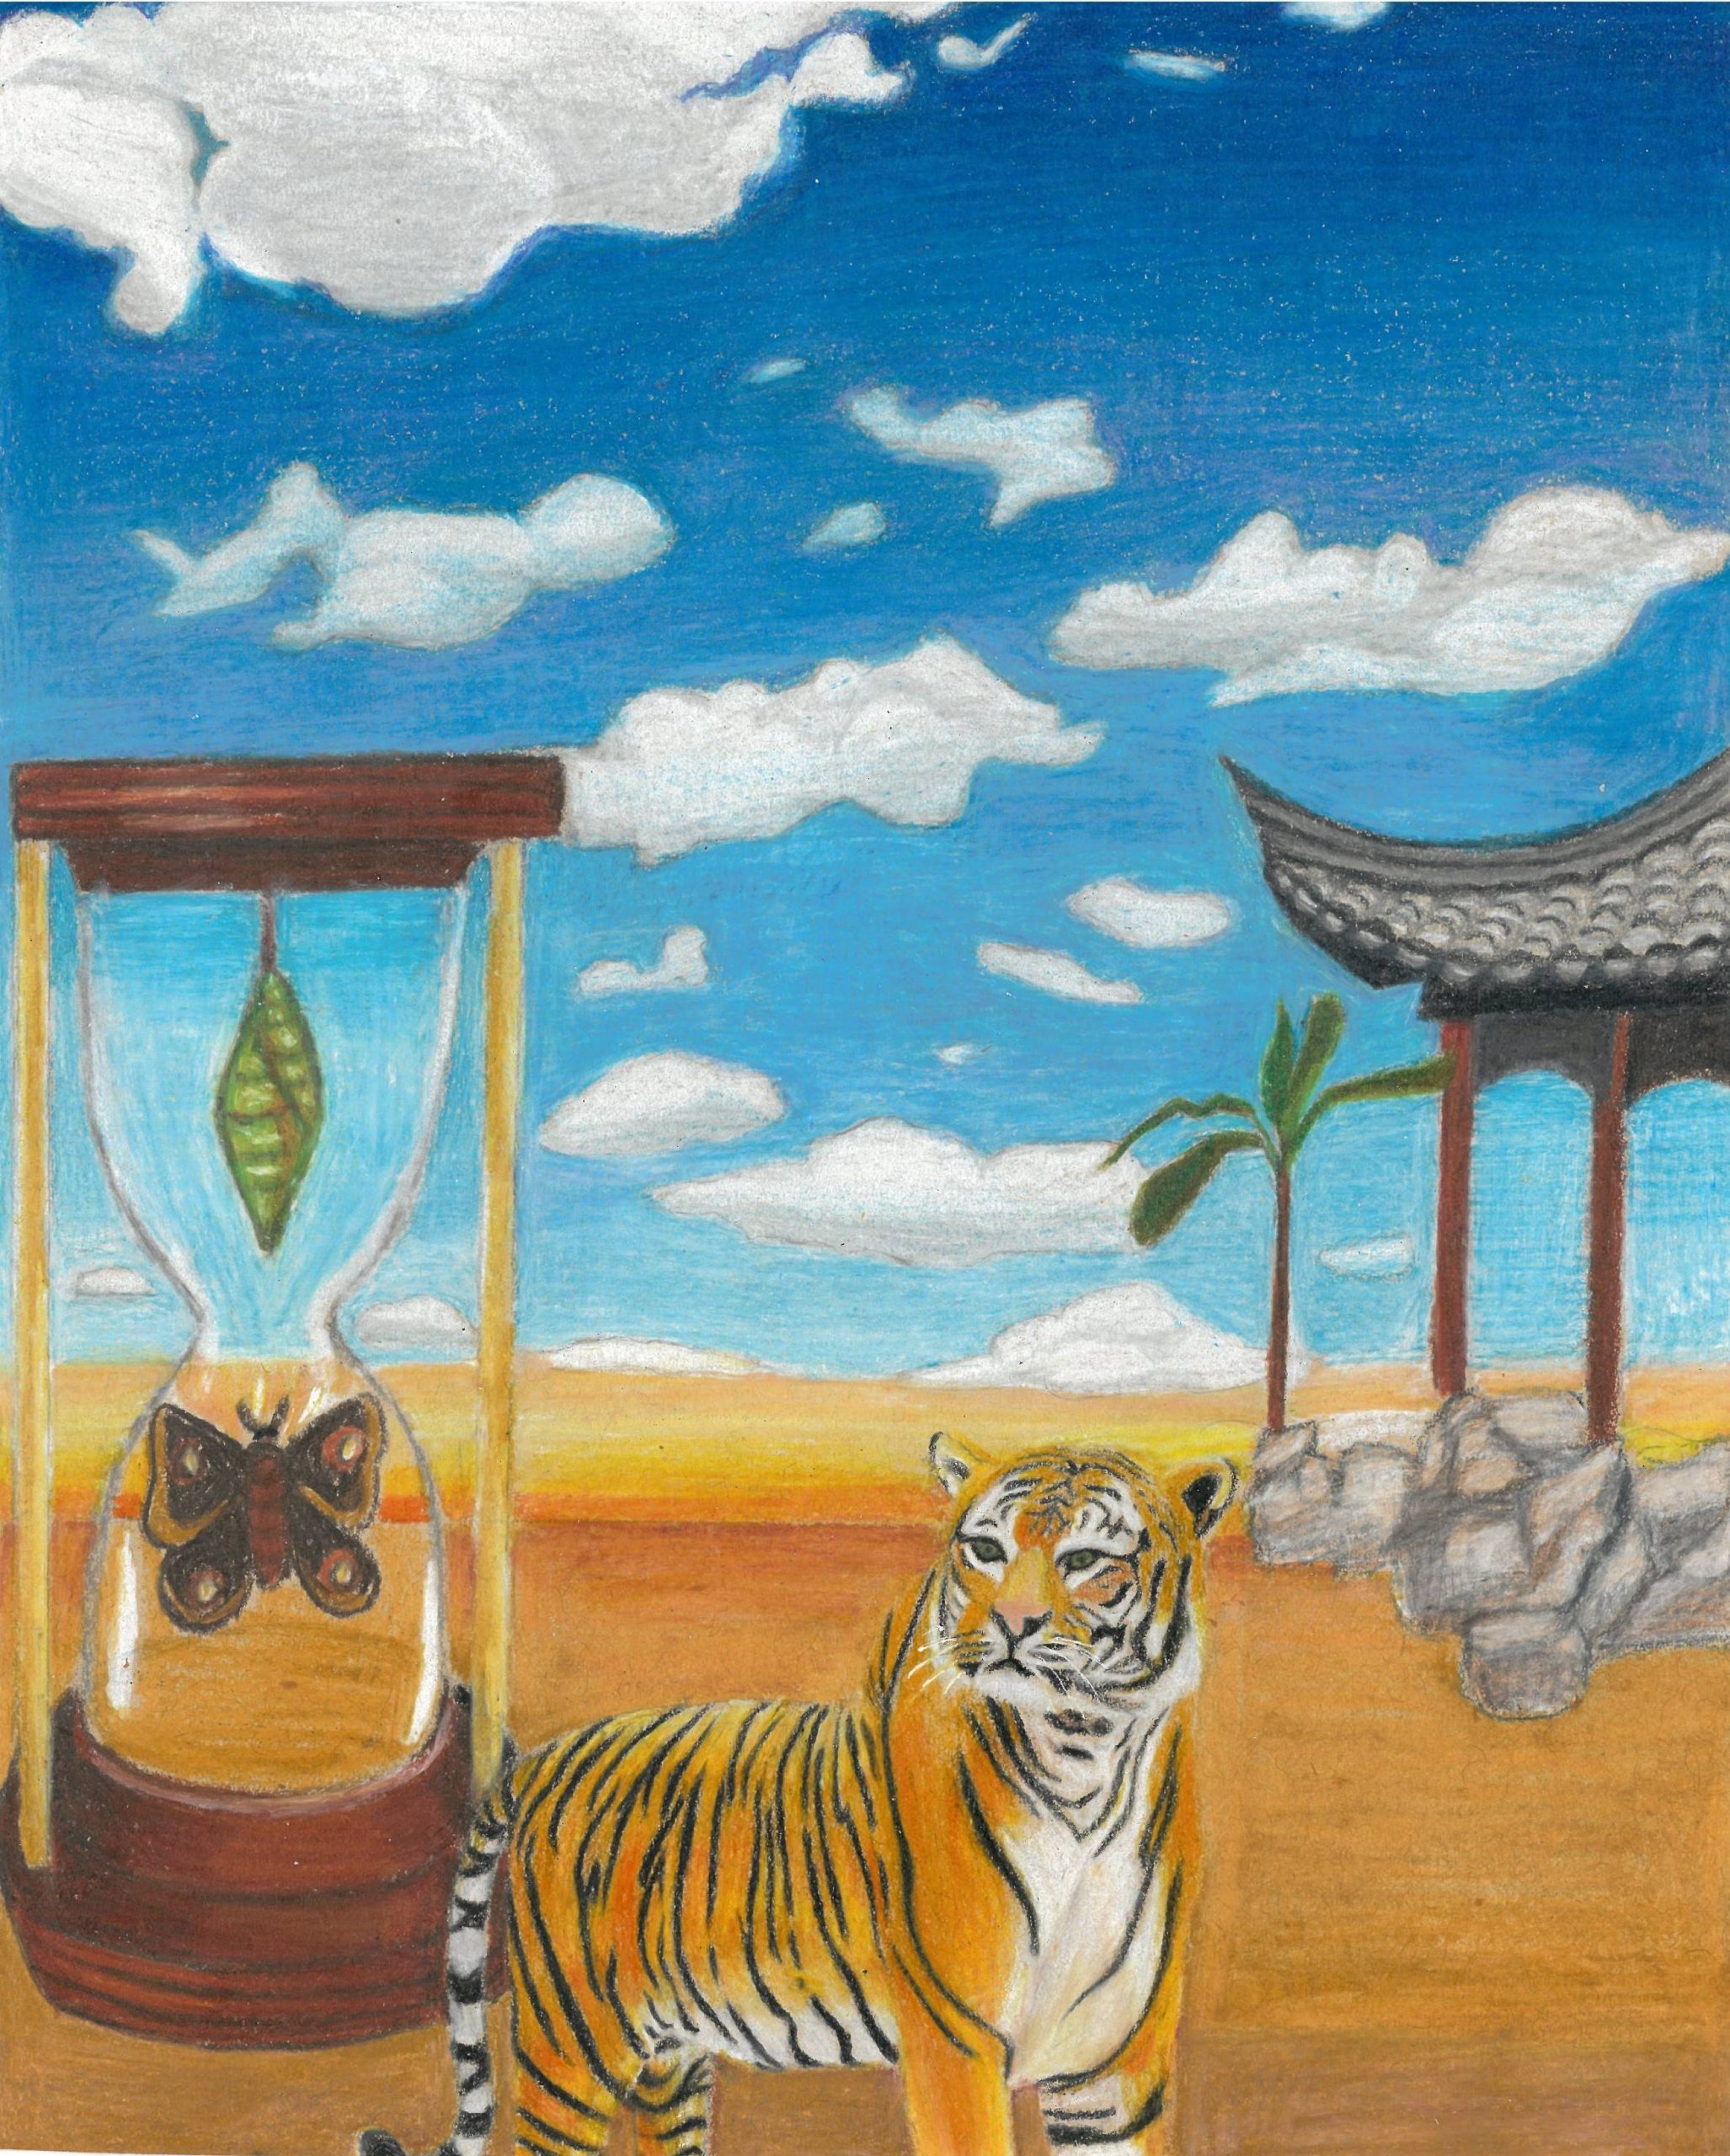 A tiger on a desert with an hourglass